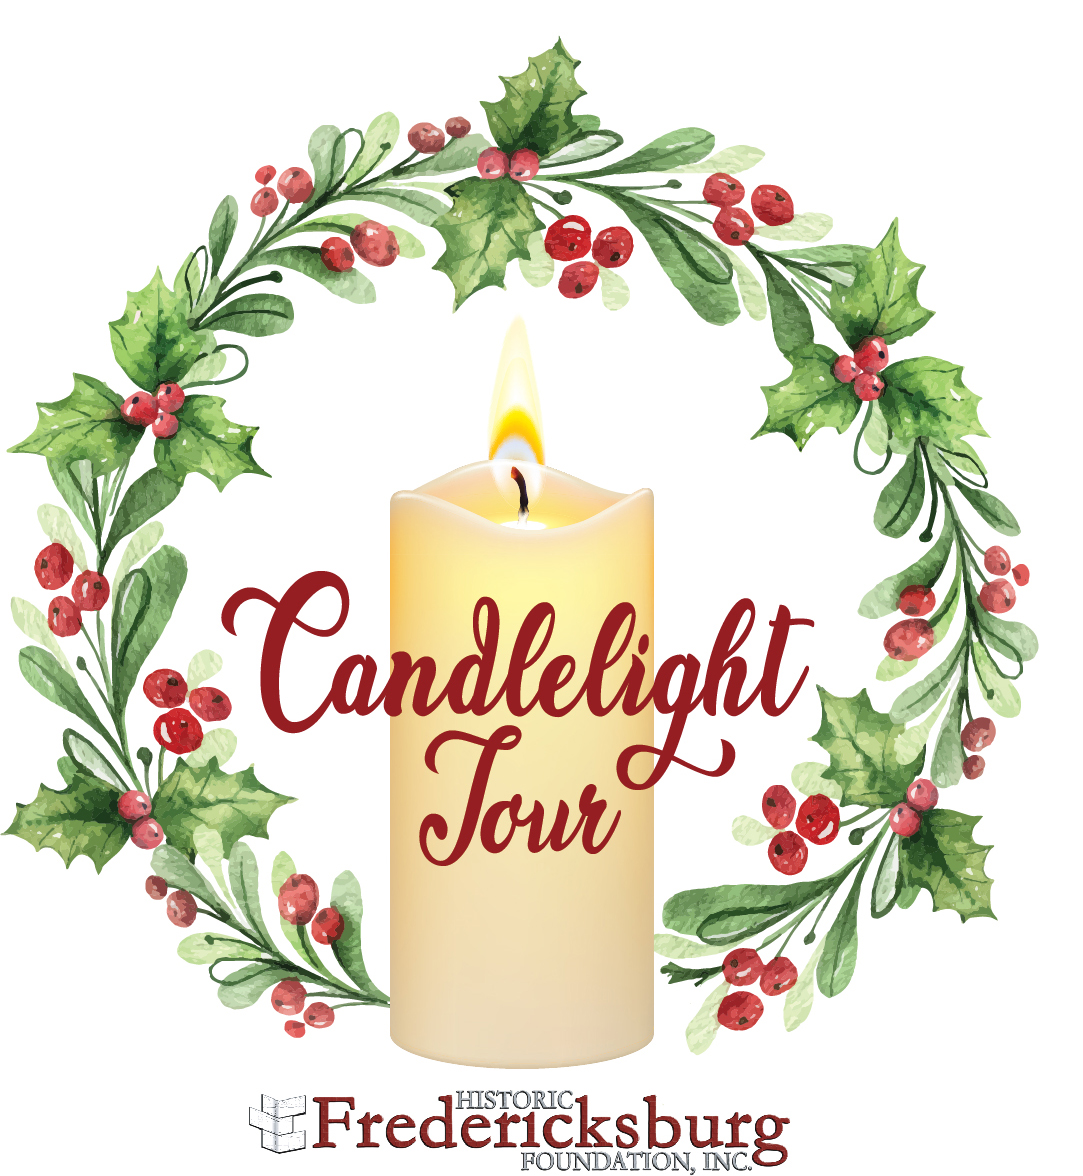 Candlelight Tour Green wreath with red holly berries is over a lit off white candle sitting in the middle